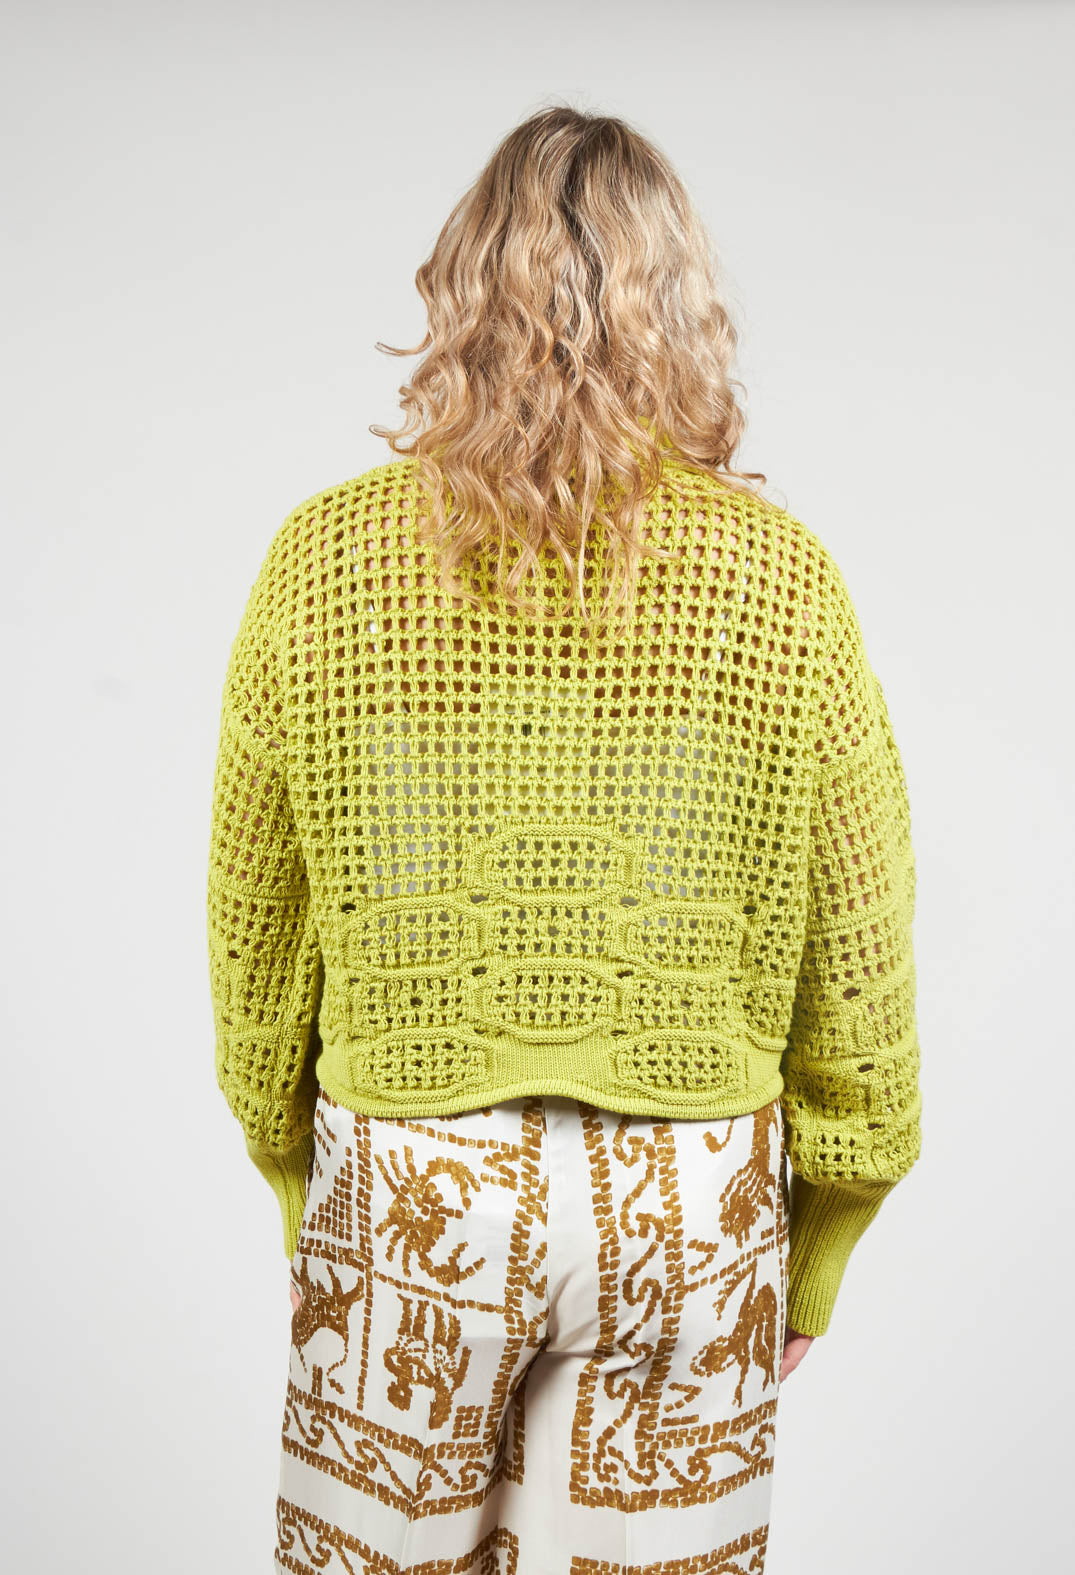 Beatrice B knitted polo top in lime